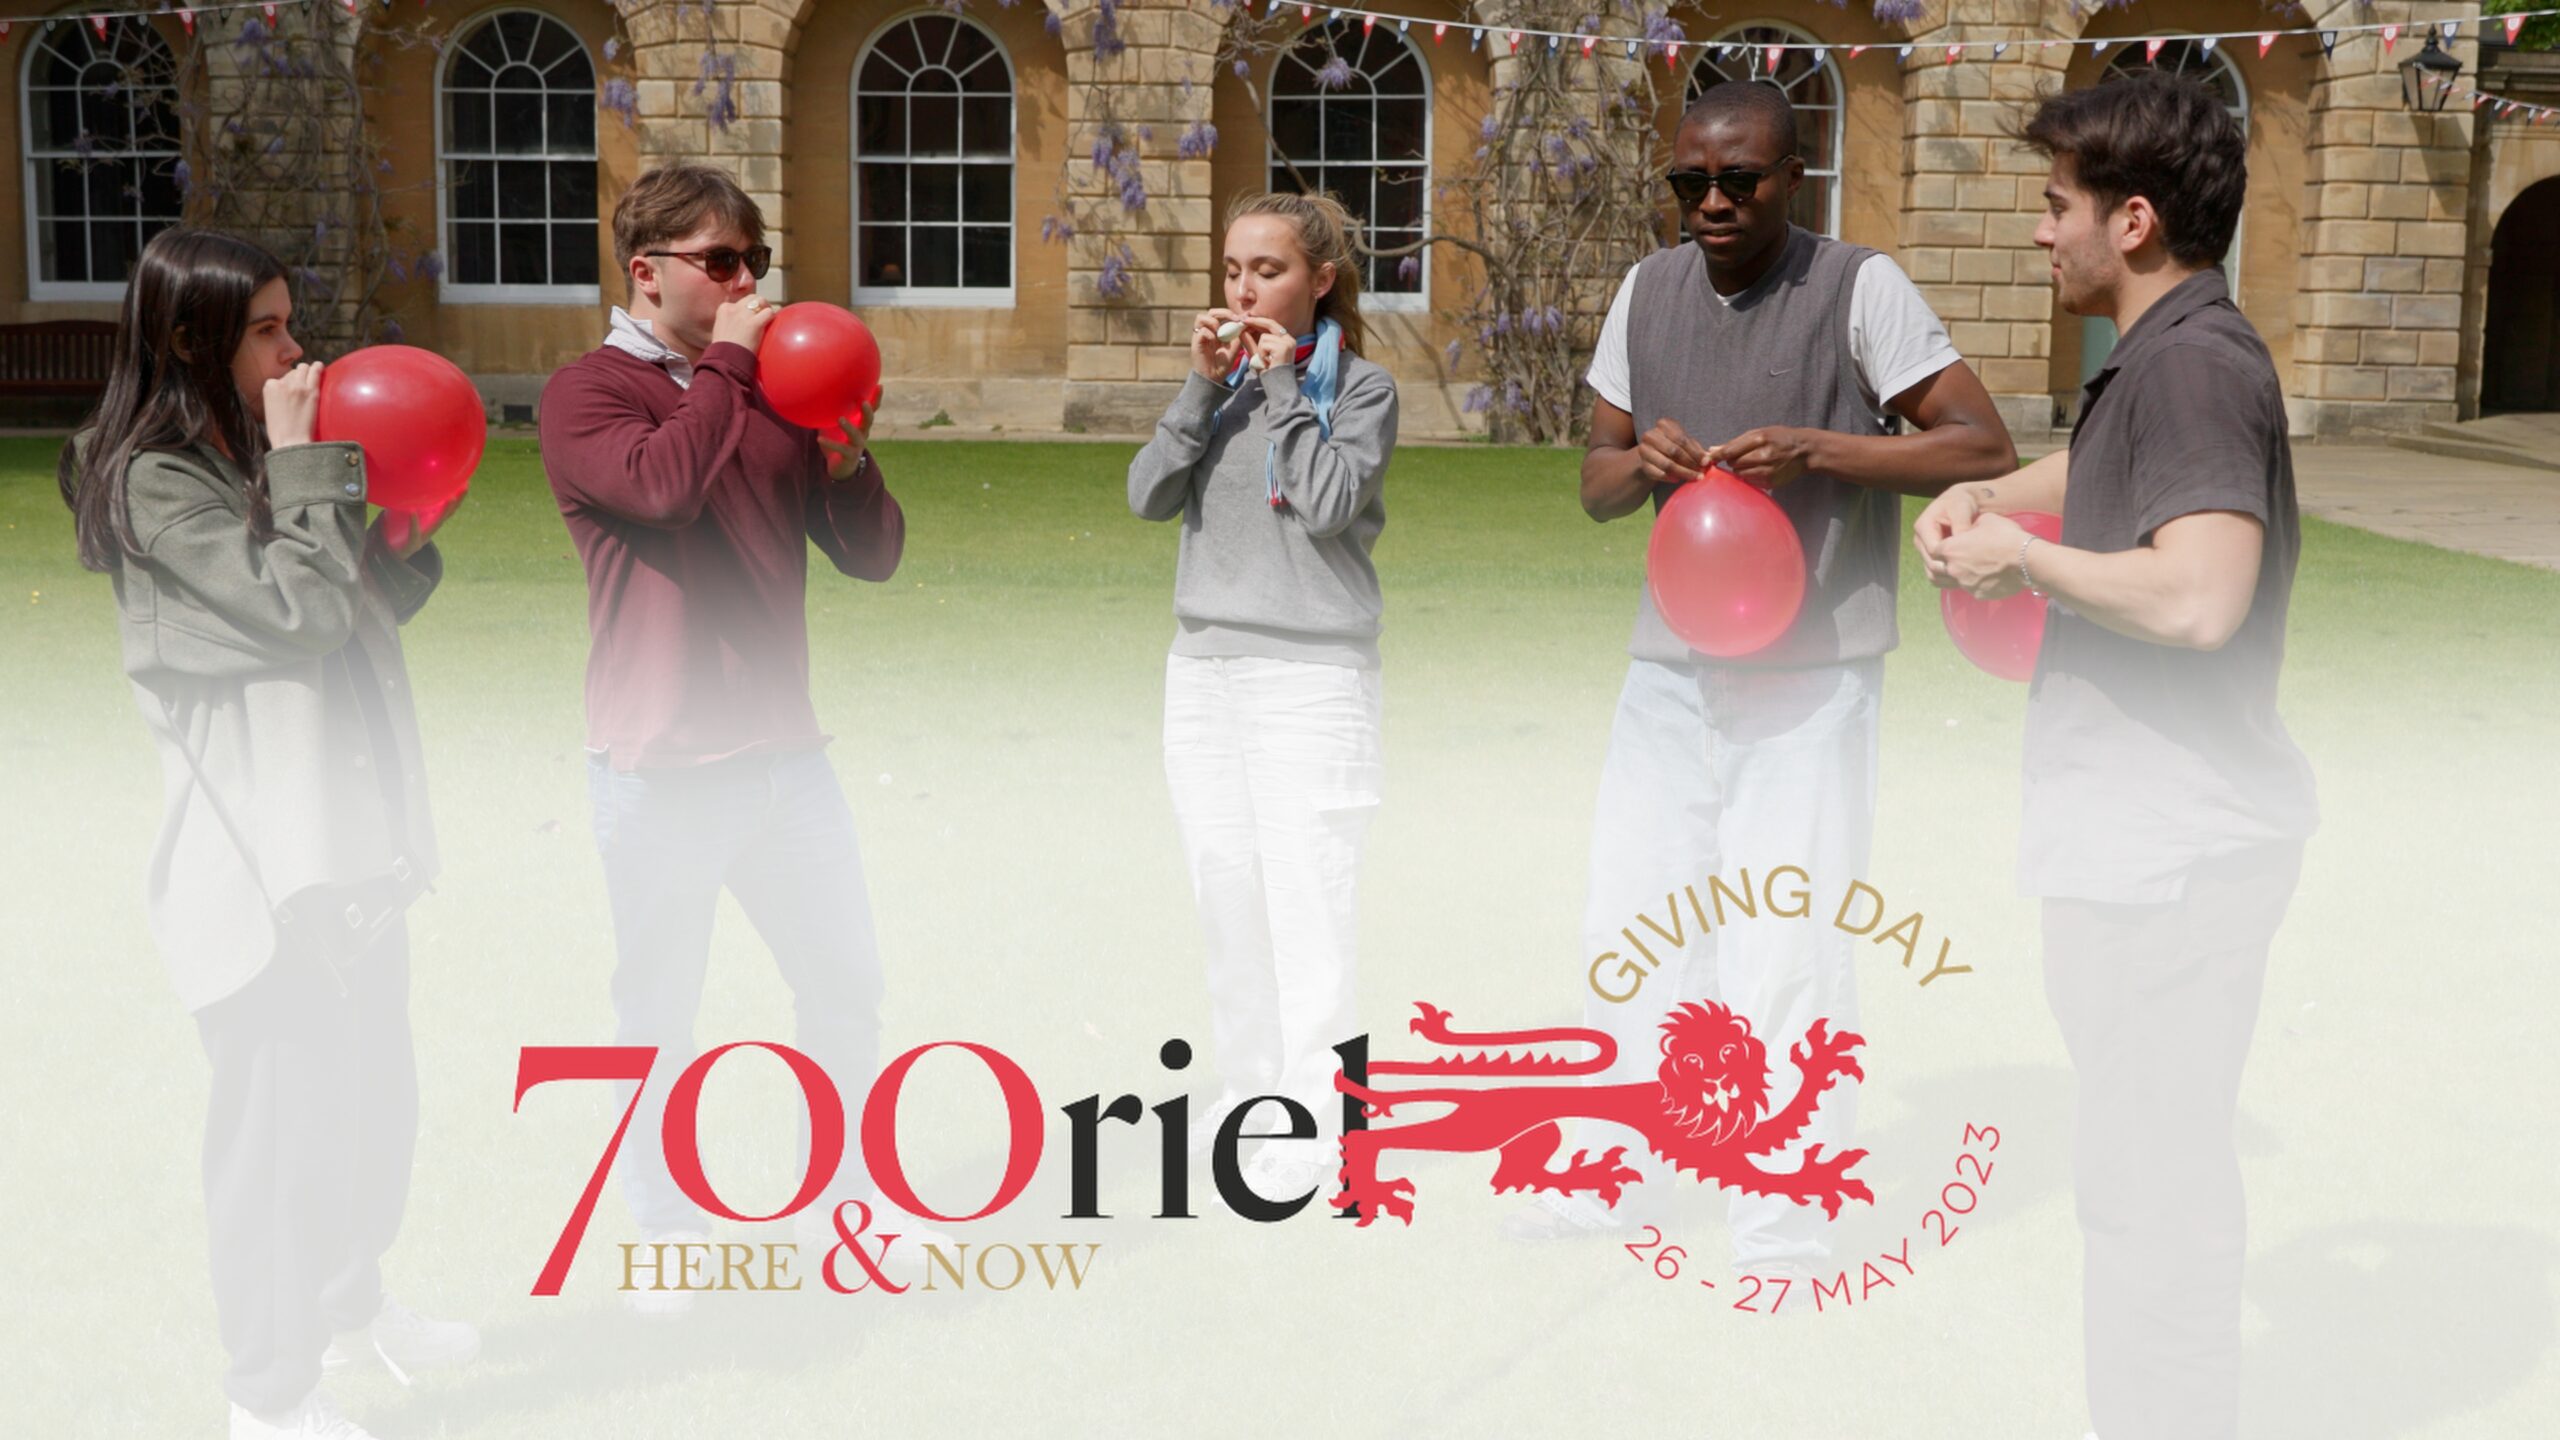 Oriel college Giving Day video